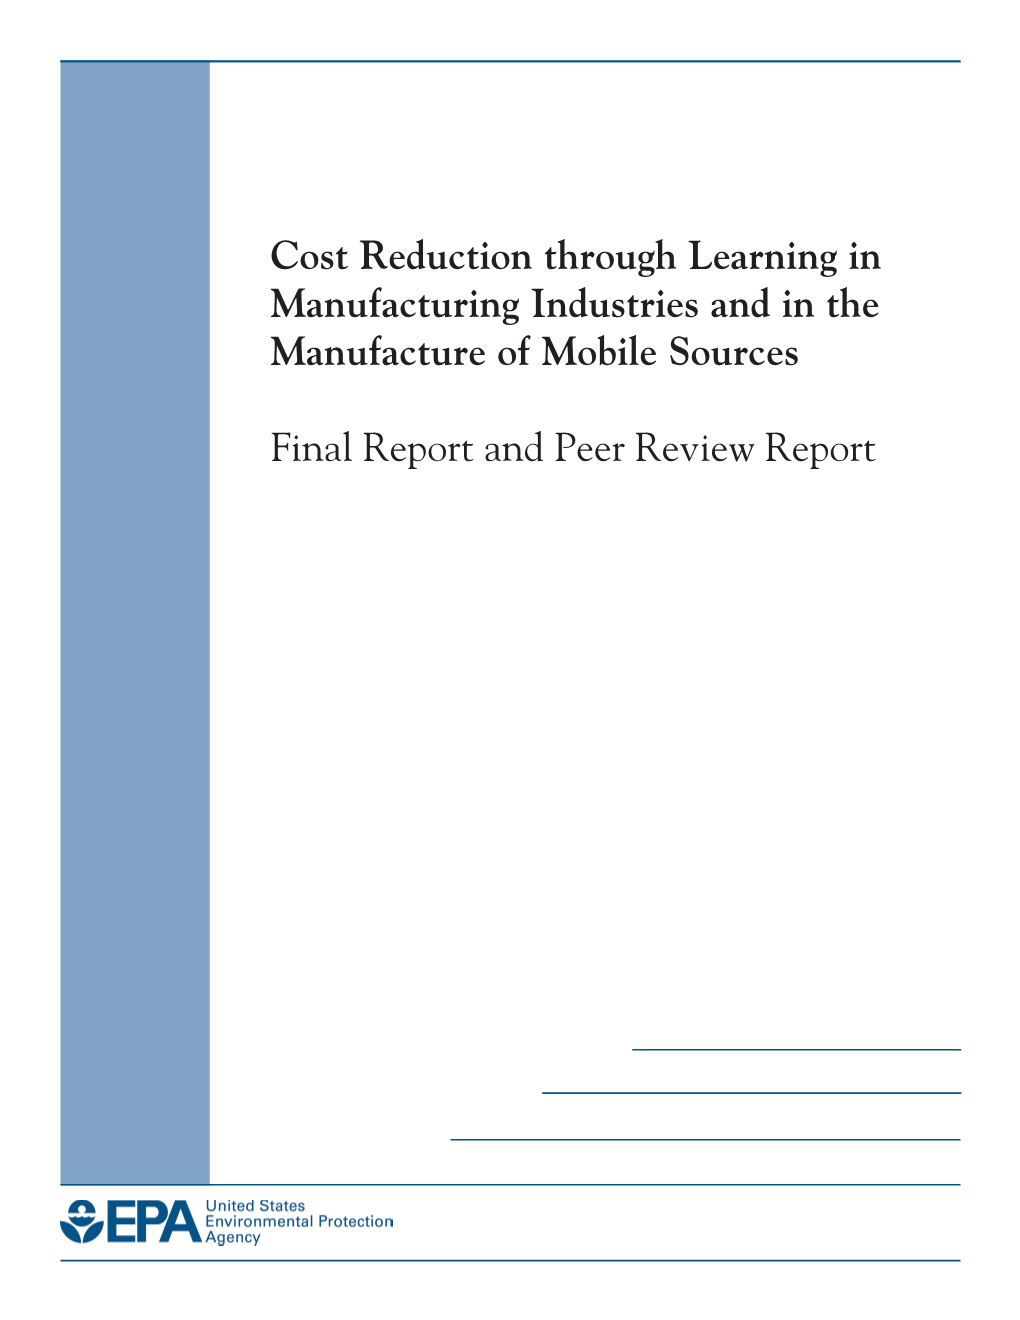 Cost Reduction Through Learning in Manufacturing Industries and in the Manufacture of Mobile Sources